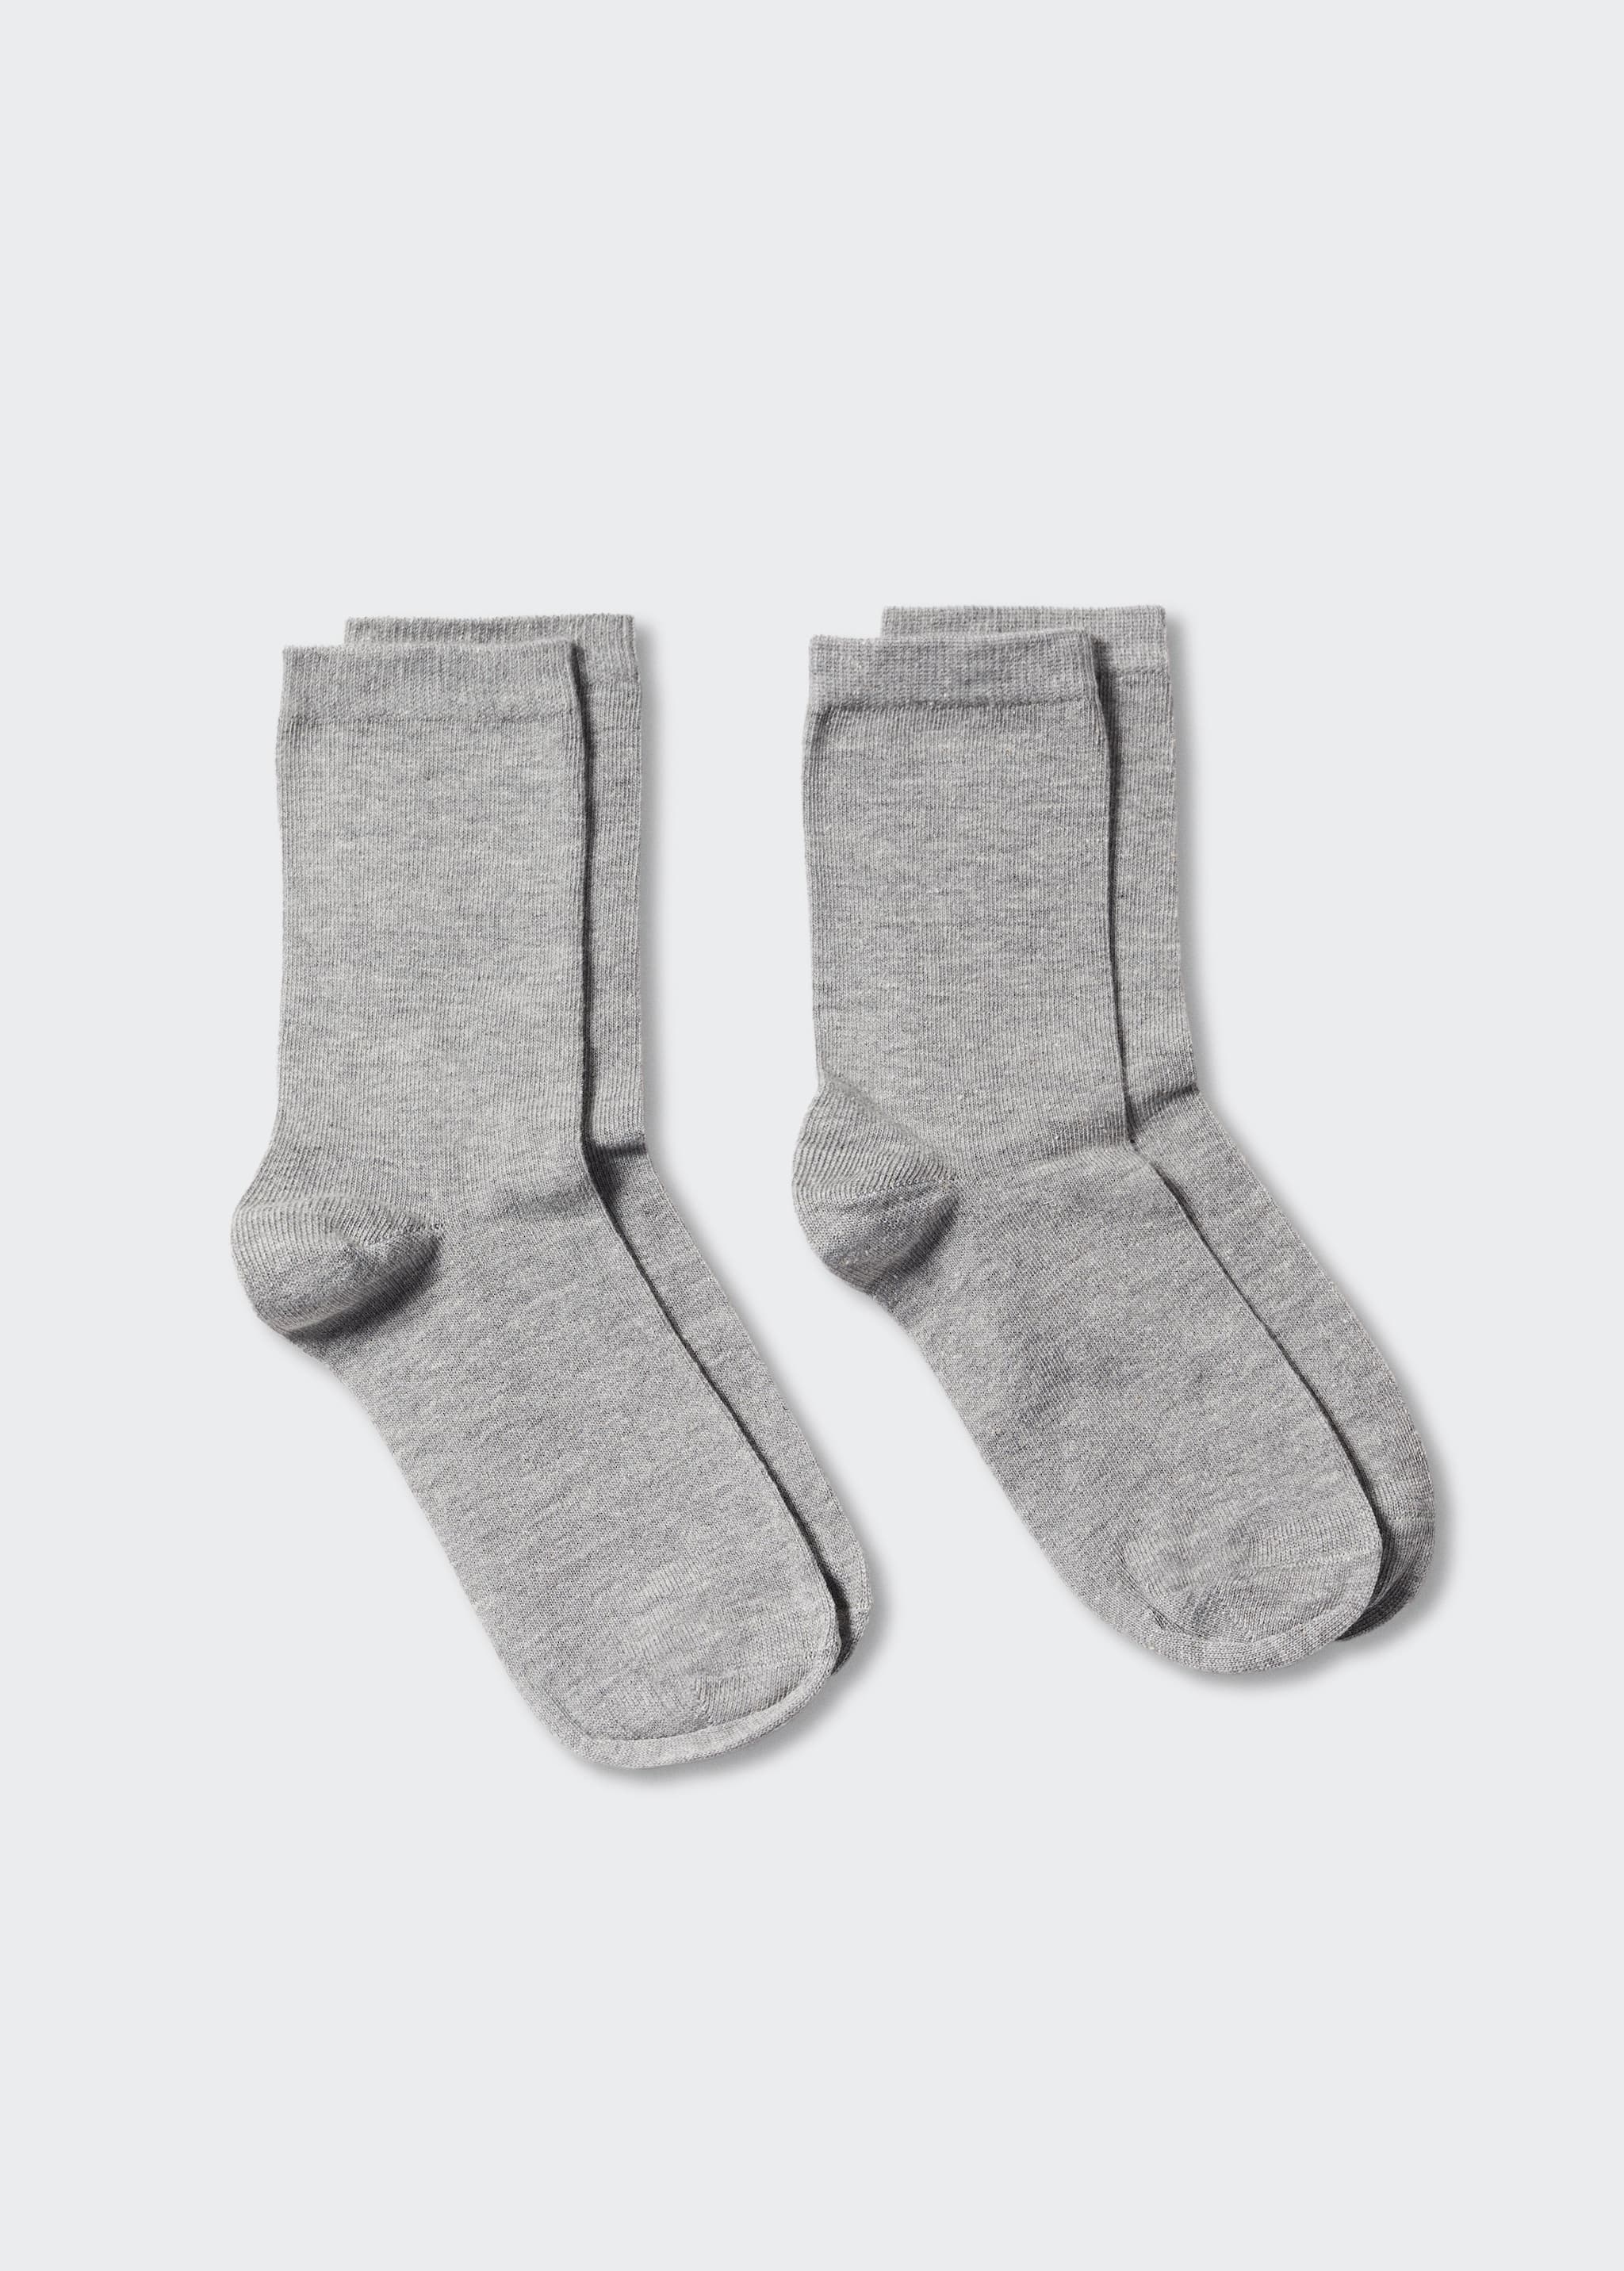 2 pack plain socks - Article without model